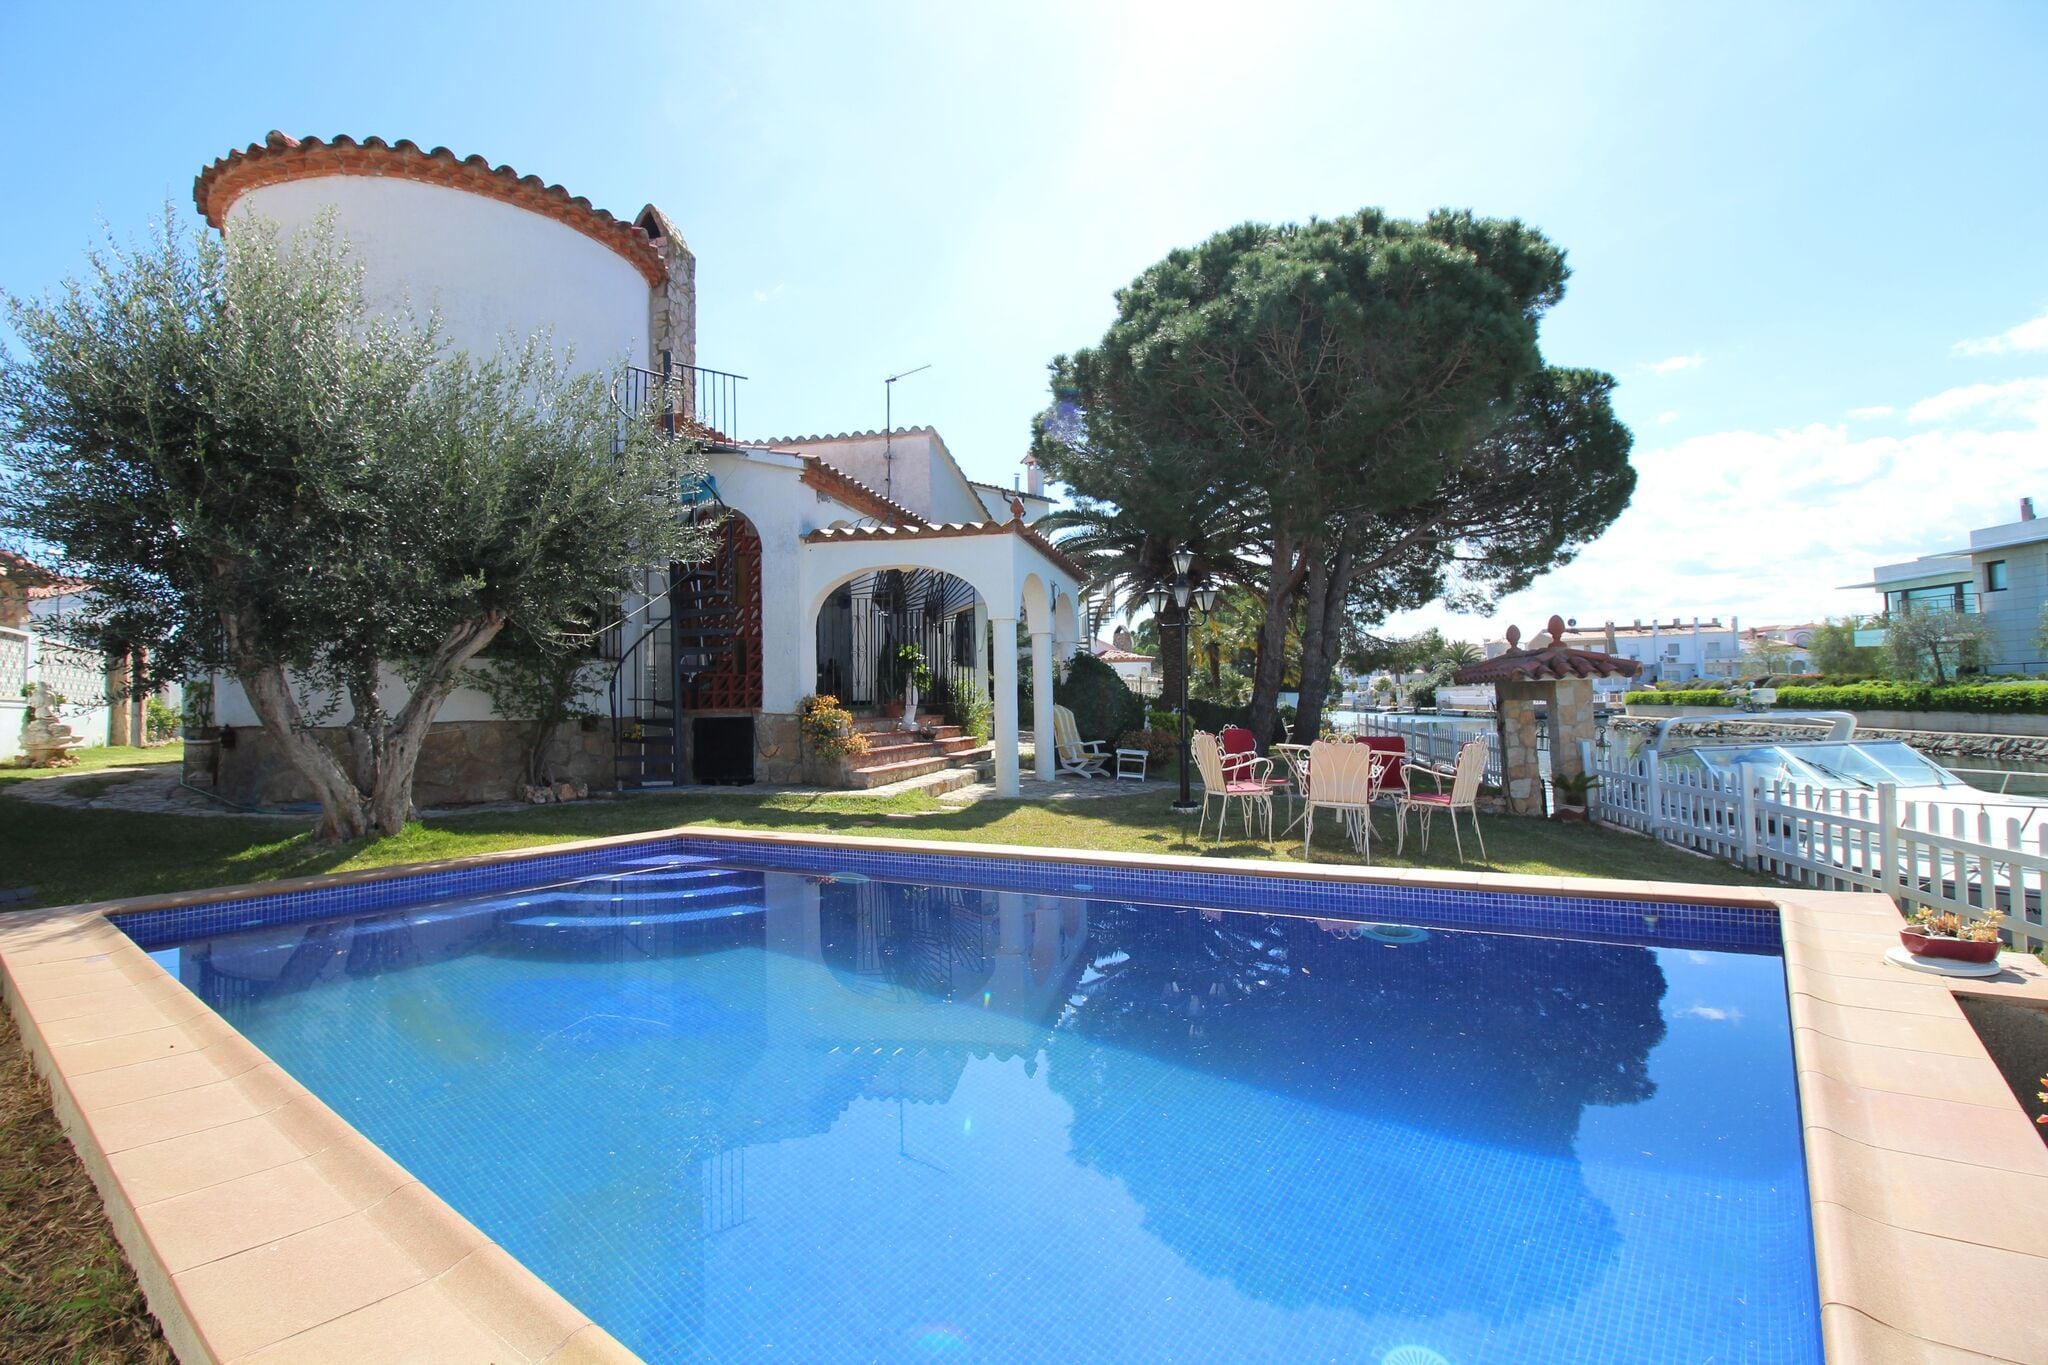 Majestic holiday home in Empuriabrava with private swimming pool, garden and mooring